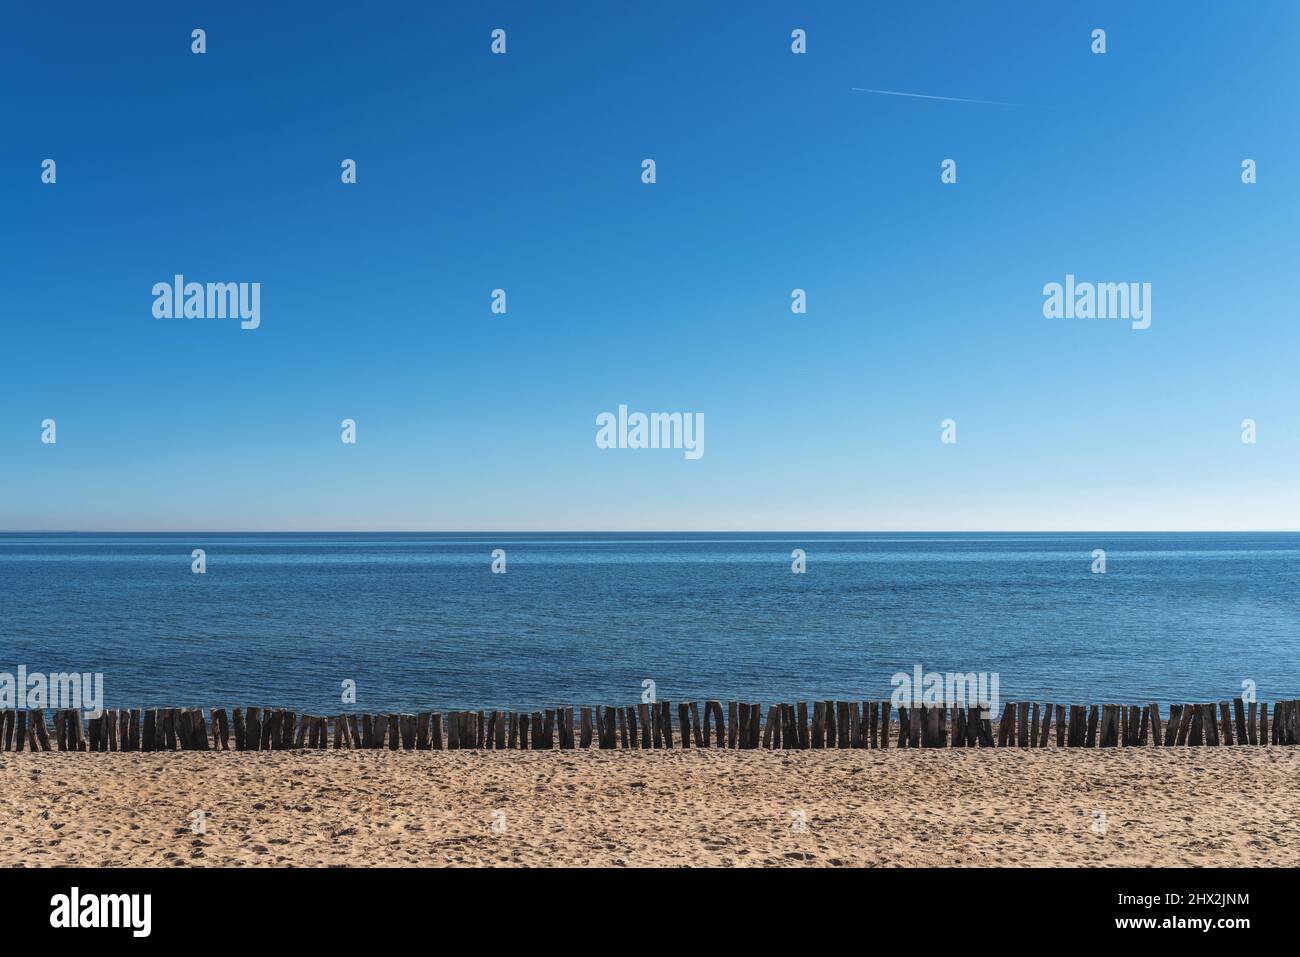 empty beach against blue baltic sea and clear sky Stock Photo